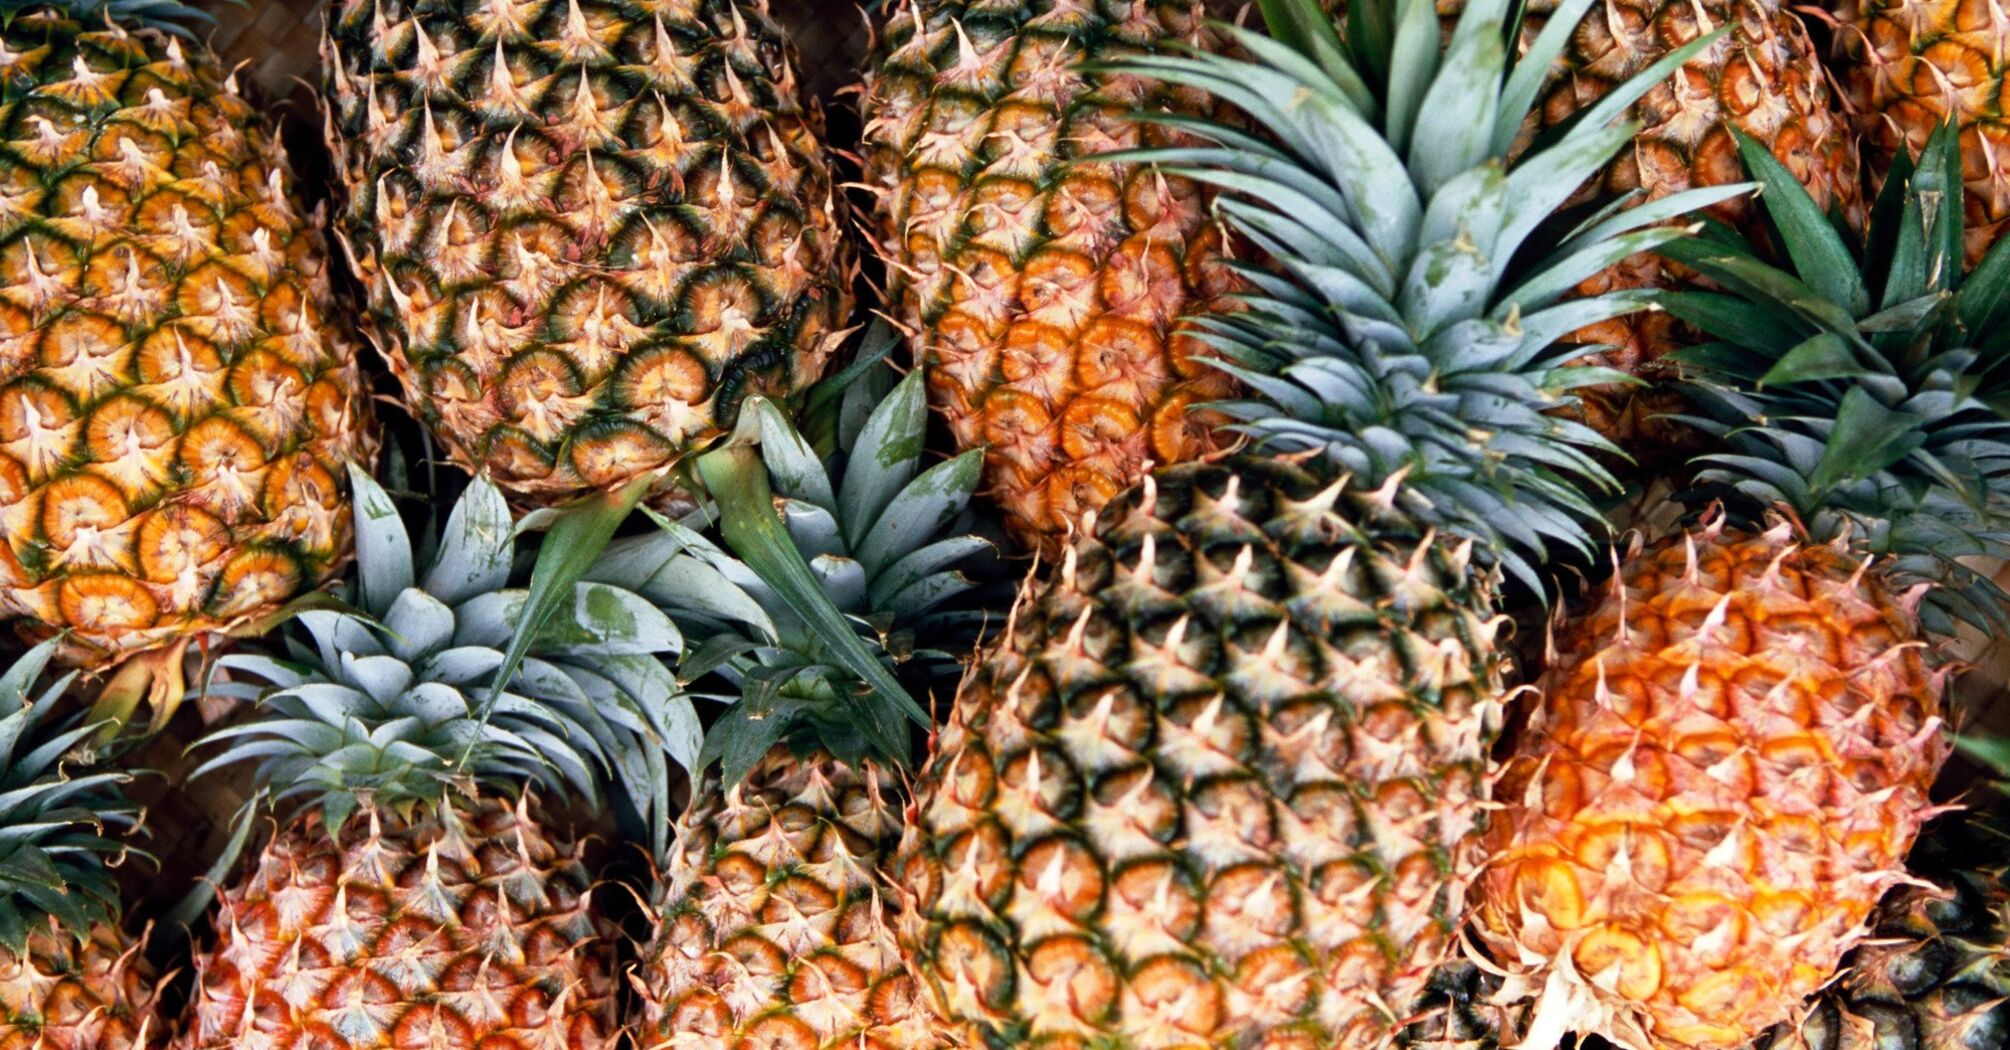 How to choose a delicious and ripe pineapple